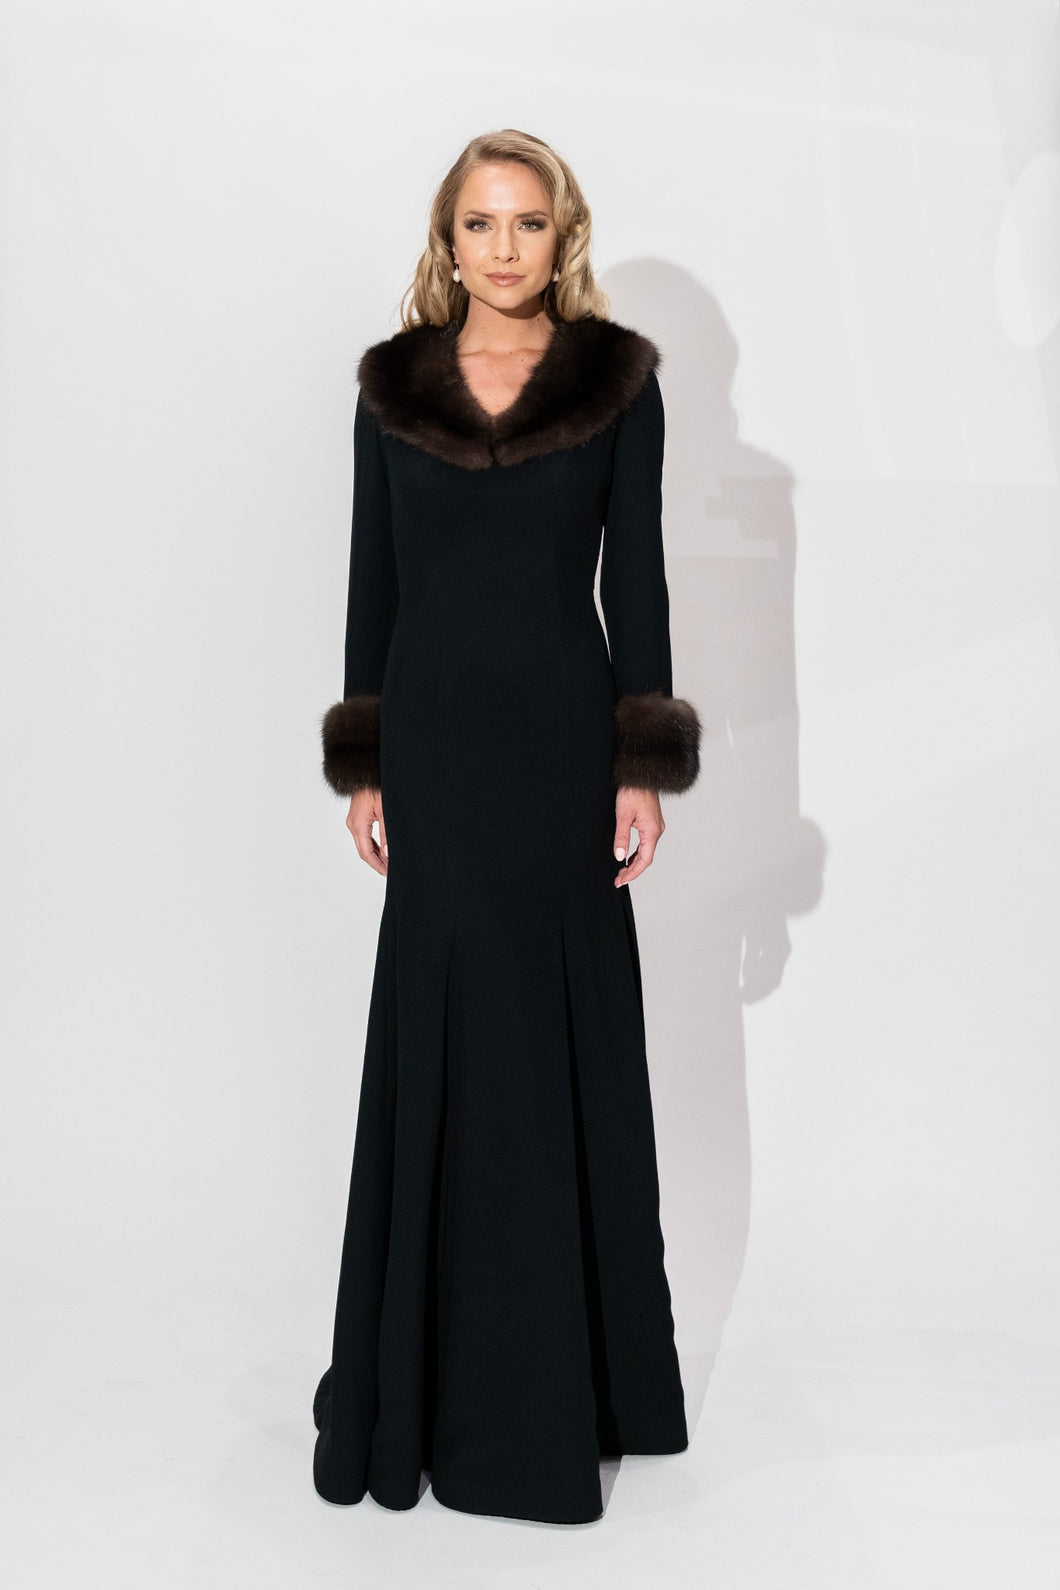 Sable Collared Gown